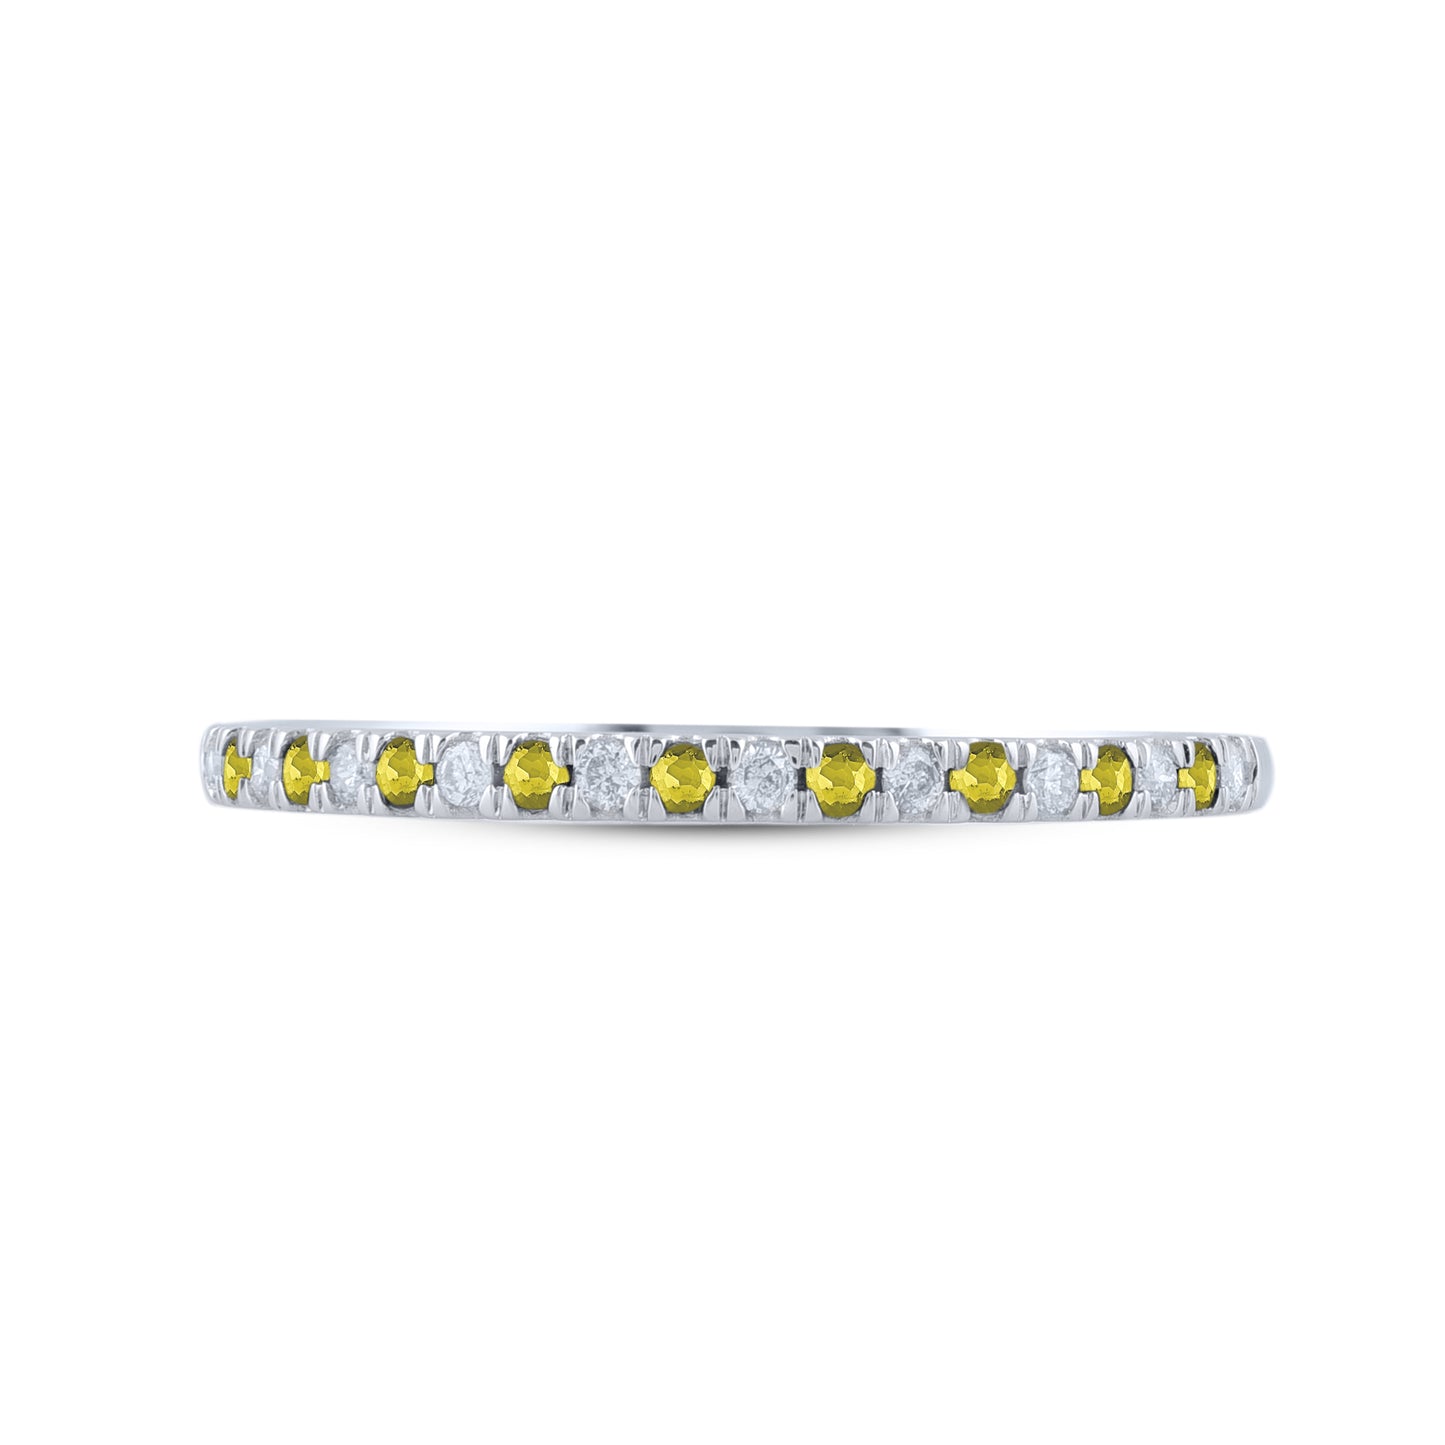 Diamond and Yellow Sapphire Stackable Band Ring in 10K Gold